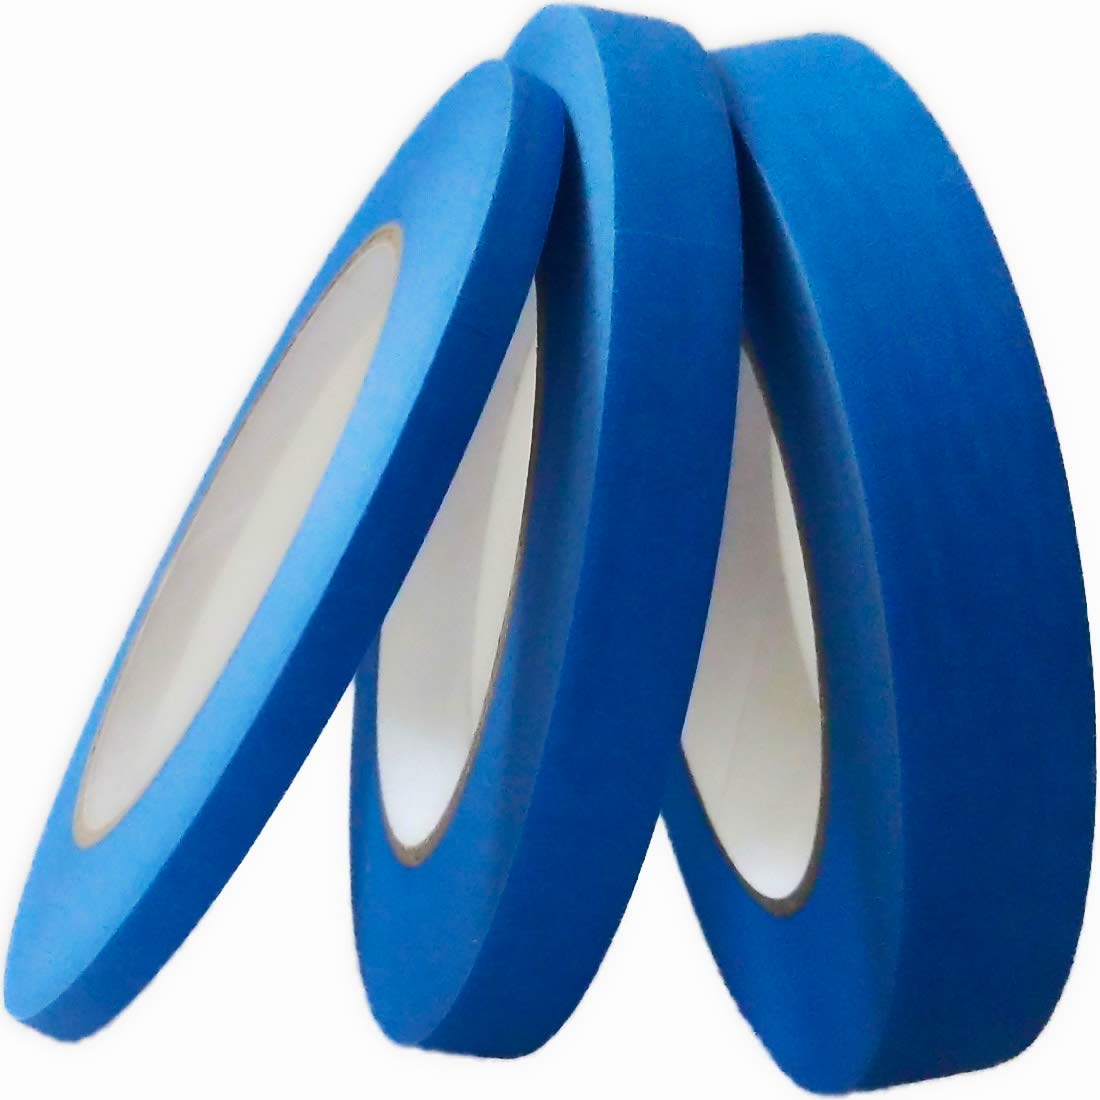 Blue Painters Tape 3 Pack, 1 inch, 1.4 inch, 2 inch, 60 Yards,  Multi-Surface Including Wall Painting, Labeling, Home, Office, Crafts,  Sharp Edge Lines